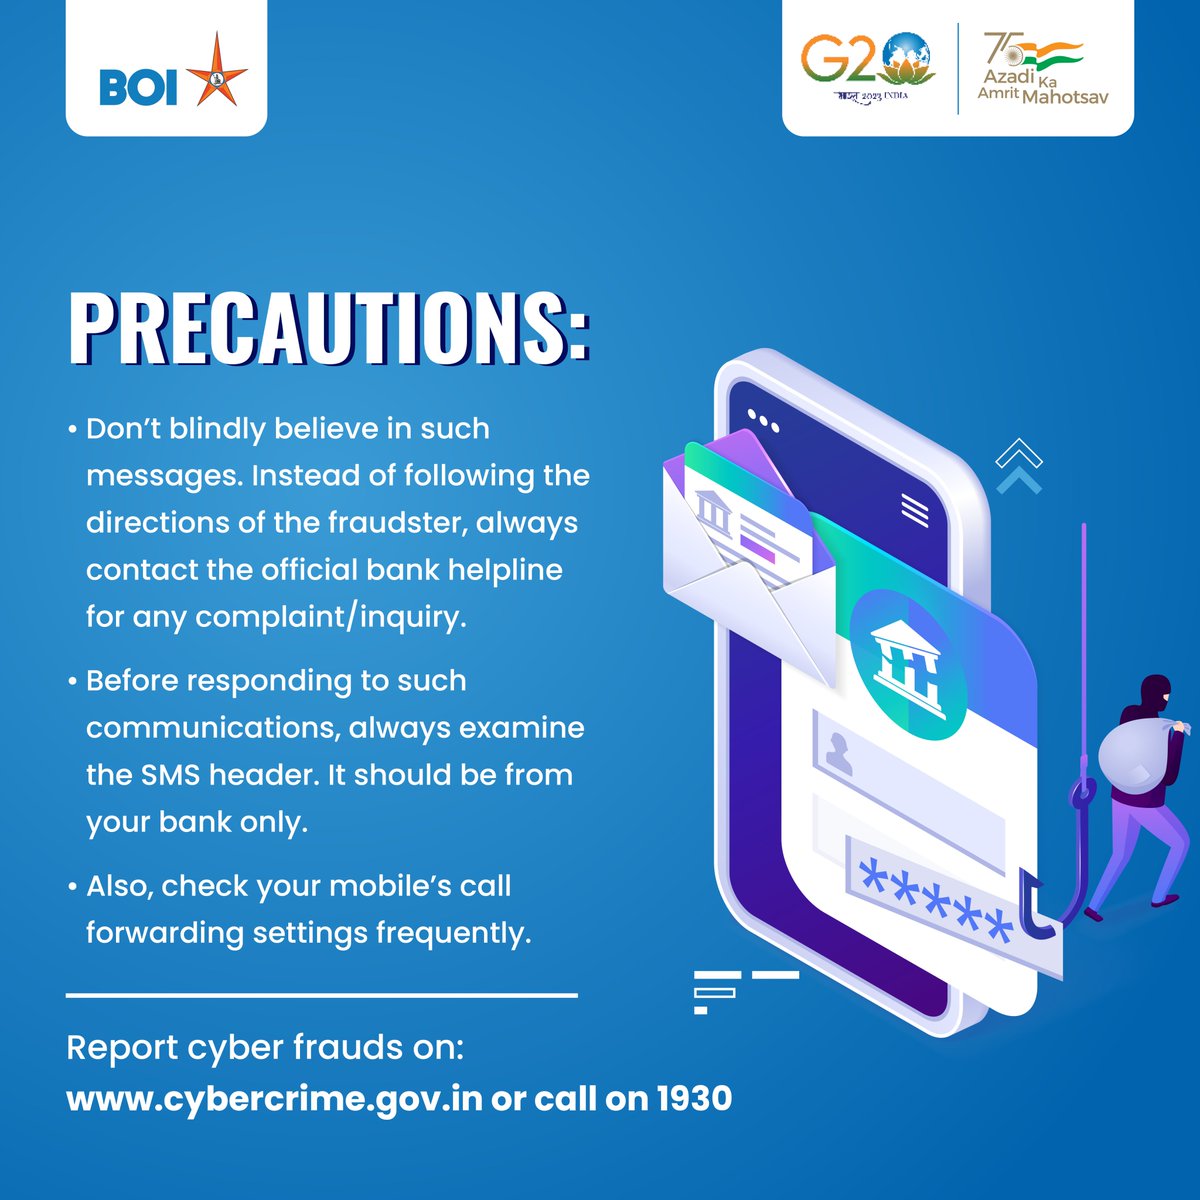 Beware before you enter a hash code followed by a 10-digit mobile number on your dial pad. You could be activating call forwarding and being a victim of hash code fraud. Read through to know more.
#BankofIndia #AmritMahotsav #CyberJagrooktaDiwas #CyberSecurity